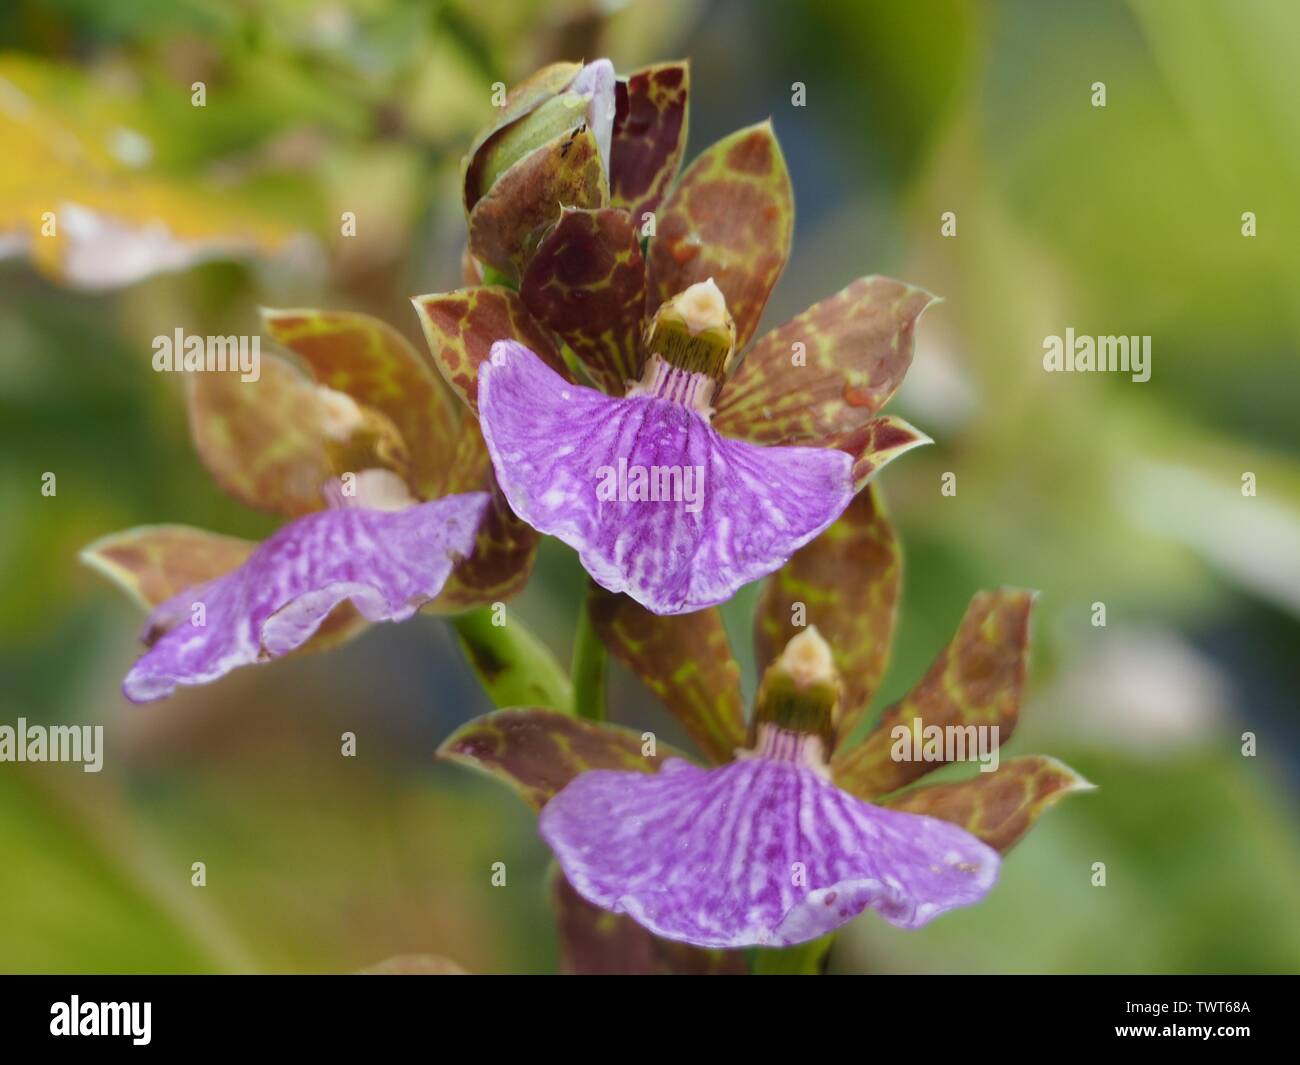 Flowers, Threes orchids blooms flowering on a stem, Zygopetalum orchid. Stripy and pattered, purple, green and brown. Winter, Australia Stock Photo